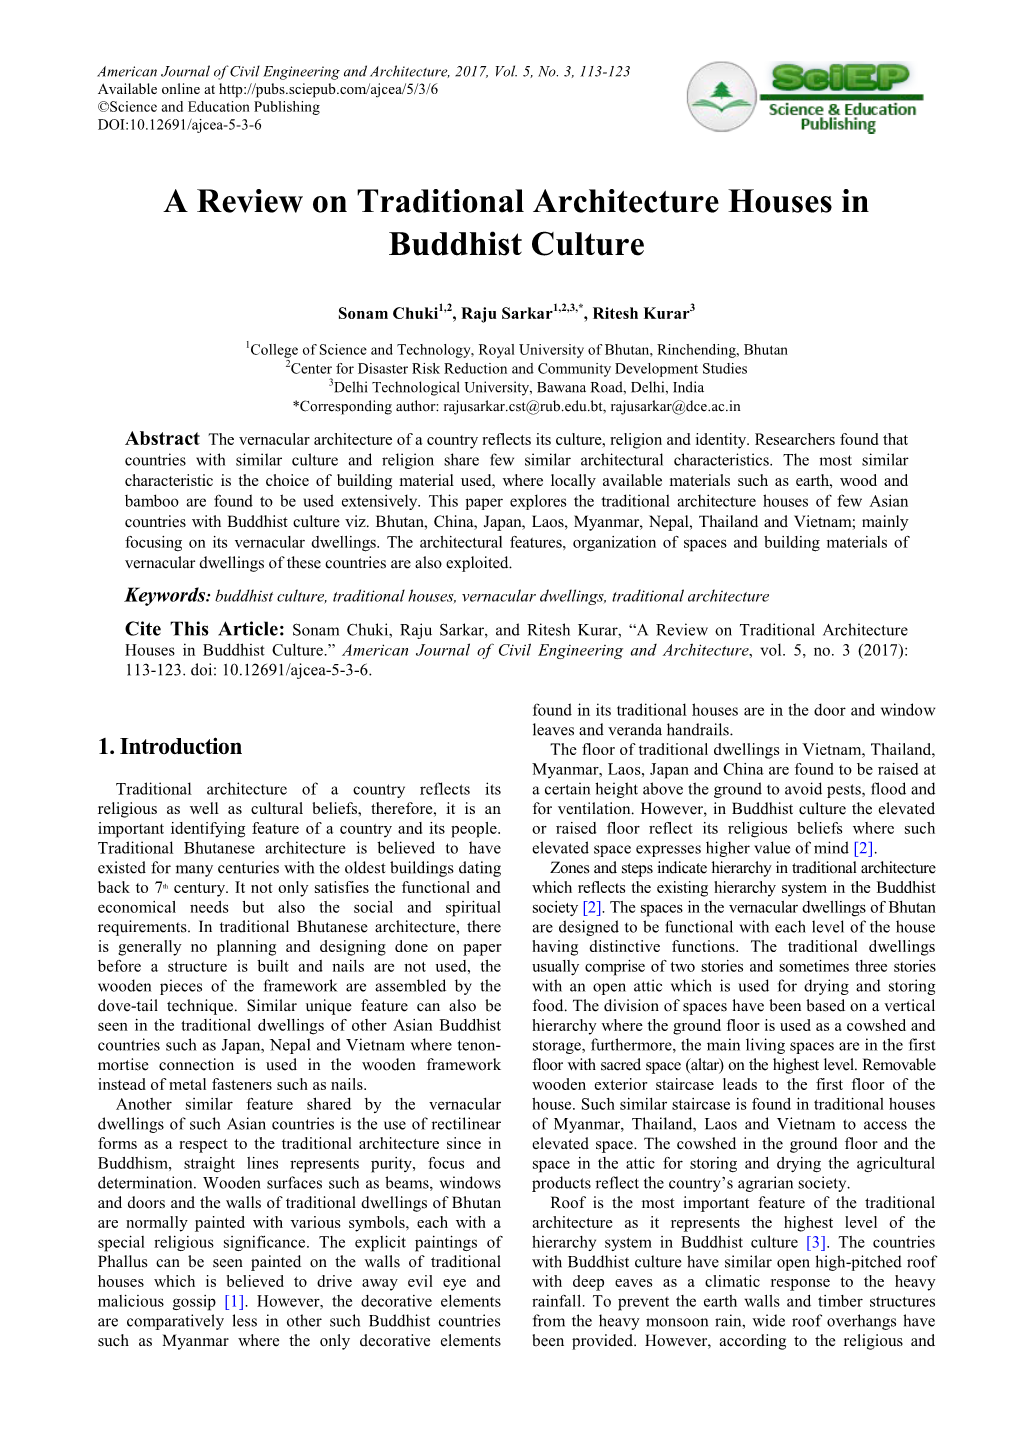 A Review on Traditional Architecture Houses in Buddhist Culture